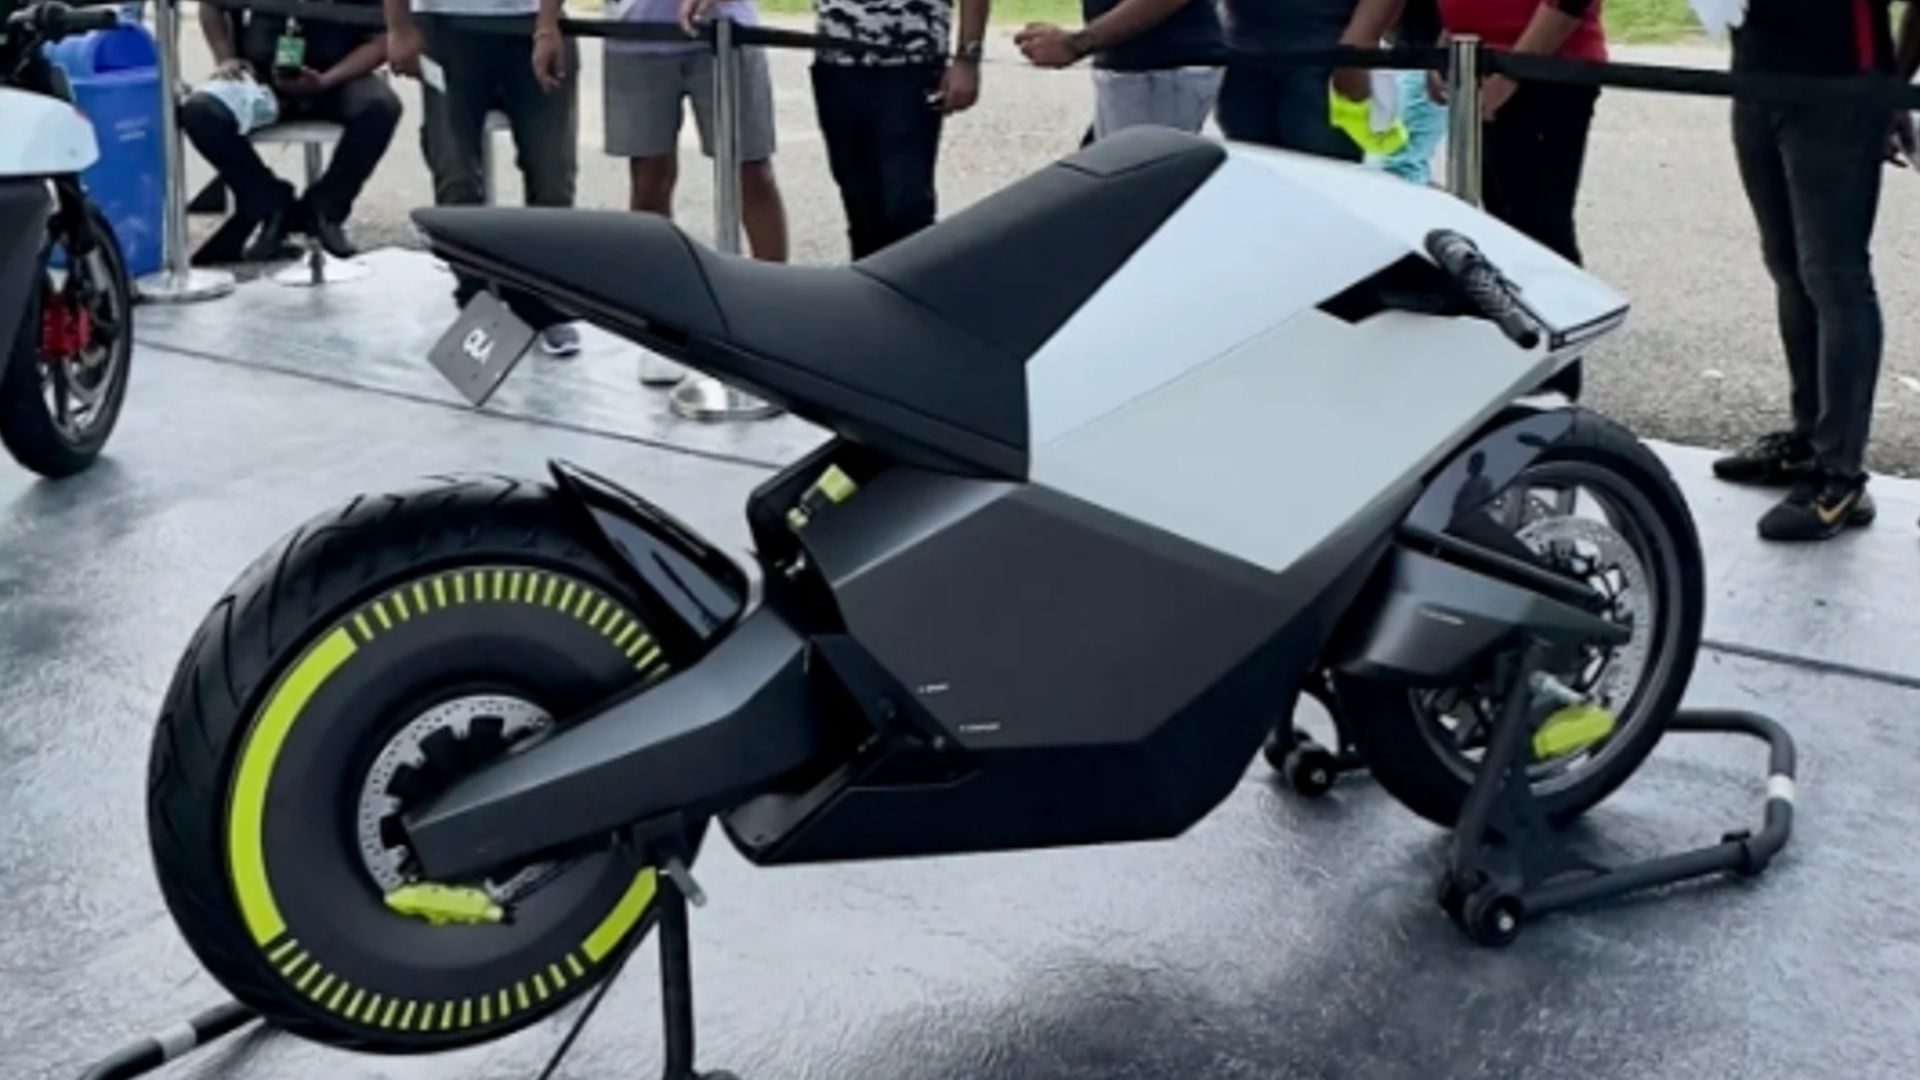 Ola Electric to launch its first e-bike next year. (Source: Ola Electric)